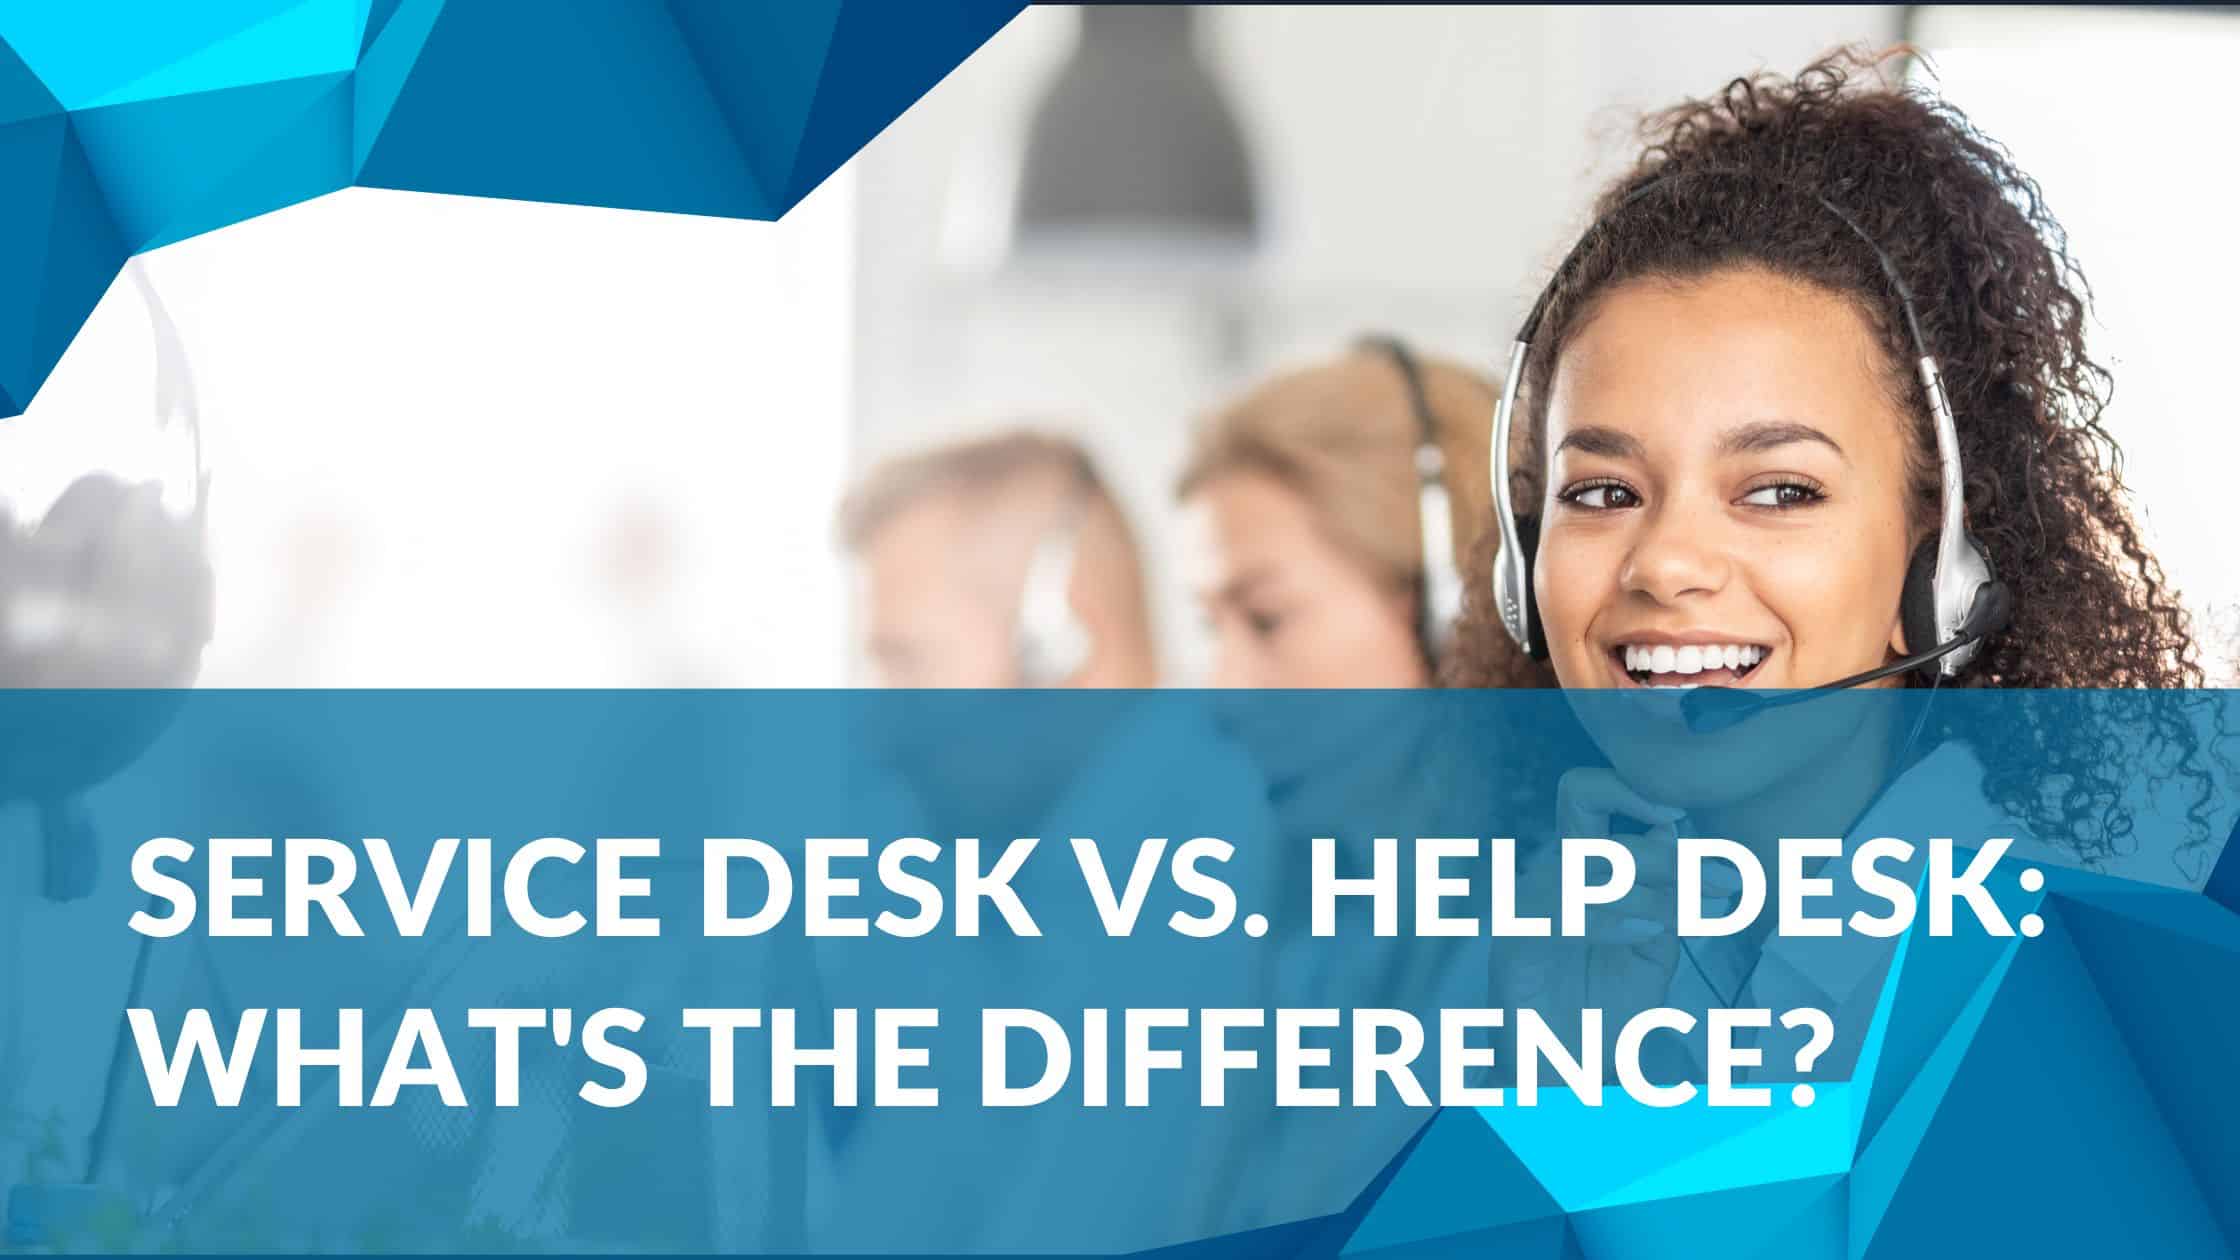 Service desk vs. help desk What's the difference